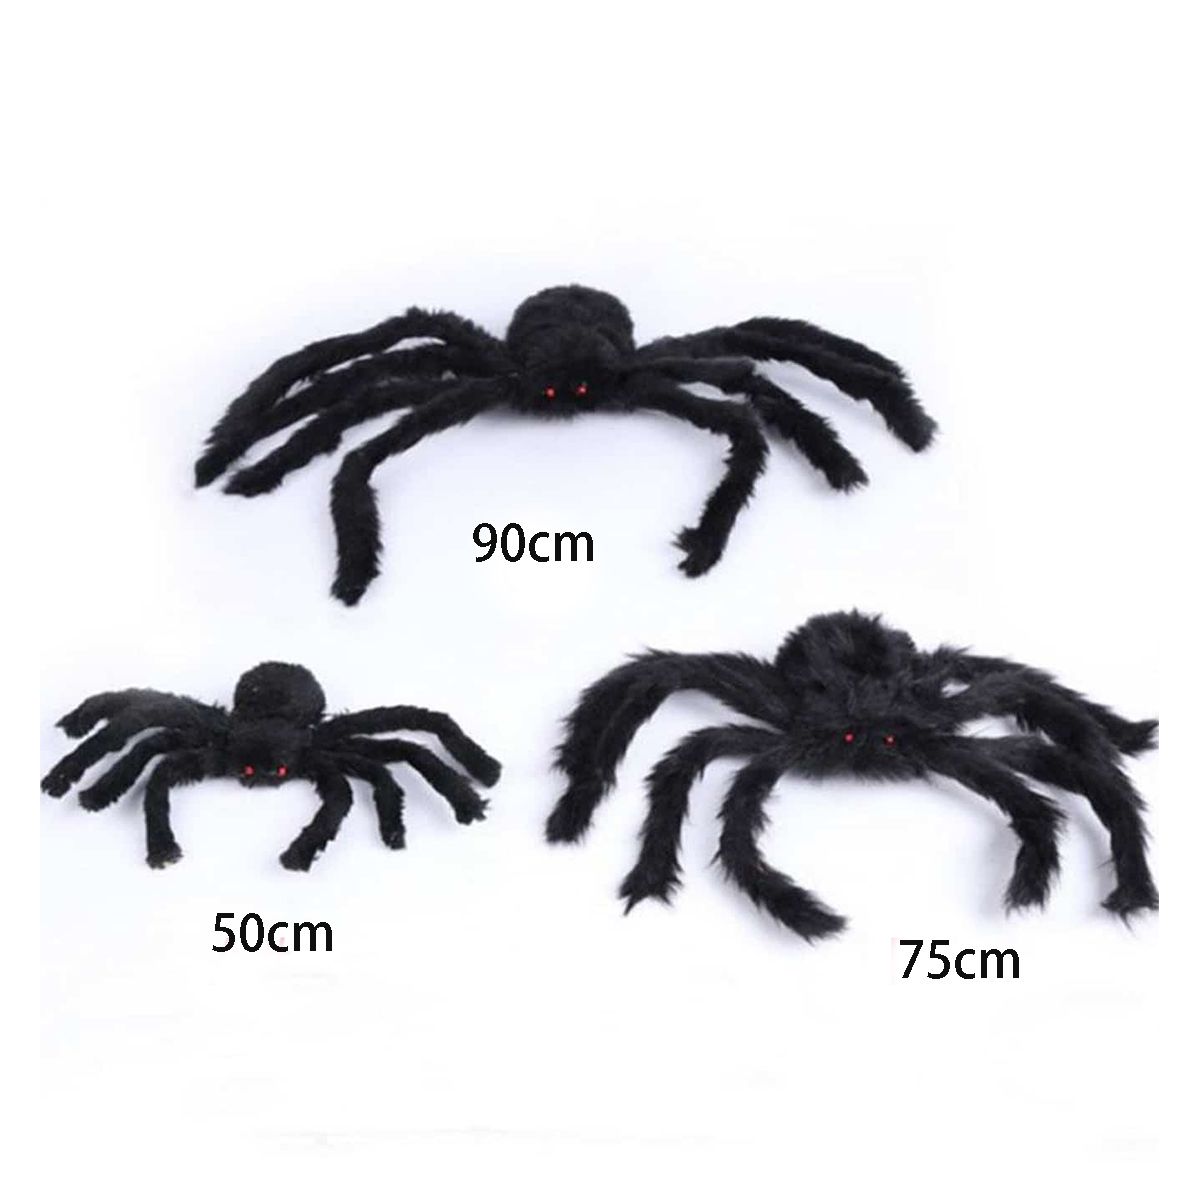 Halloween Realistic Hairy Spider Decorations Different Size Fake Spider Props Party Decorations